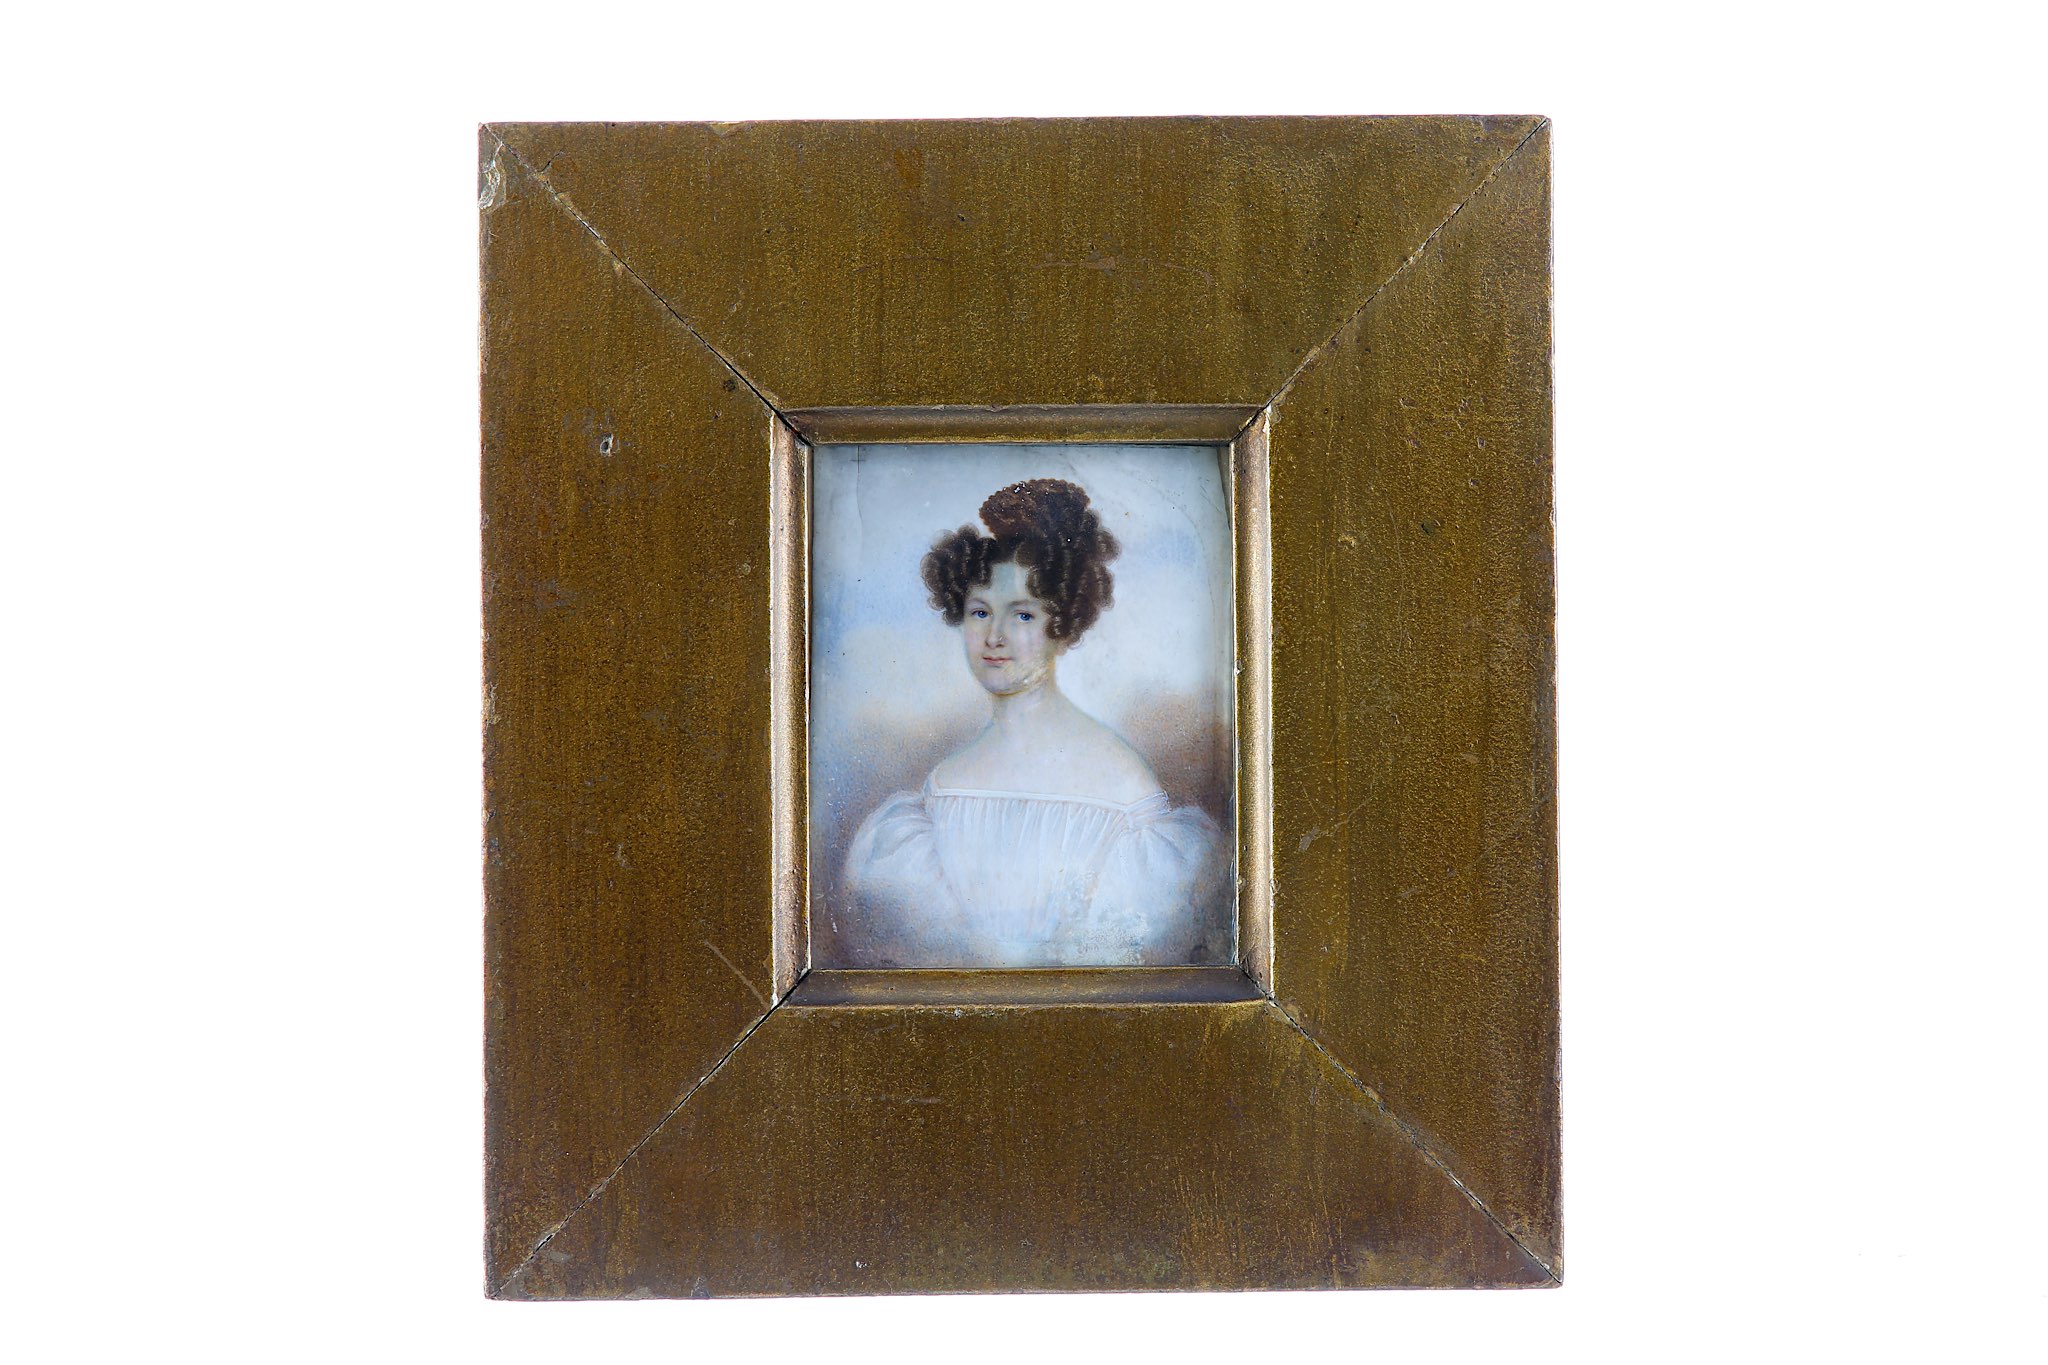 CONTINENTAL SCHOOL (CIRCA 1830). Portrait miniature of a Lady, wearing a white dress with puff